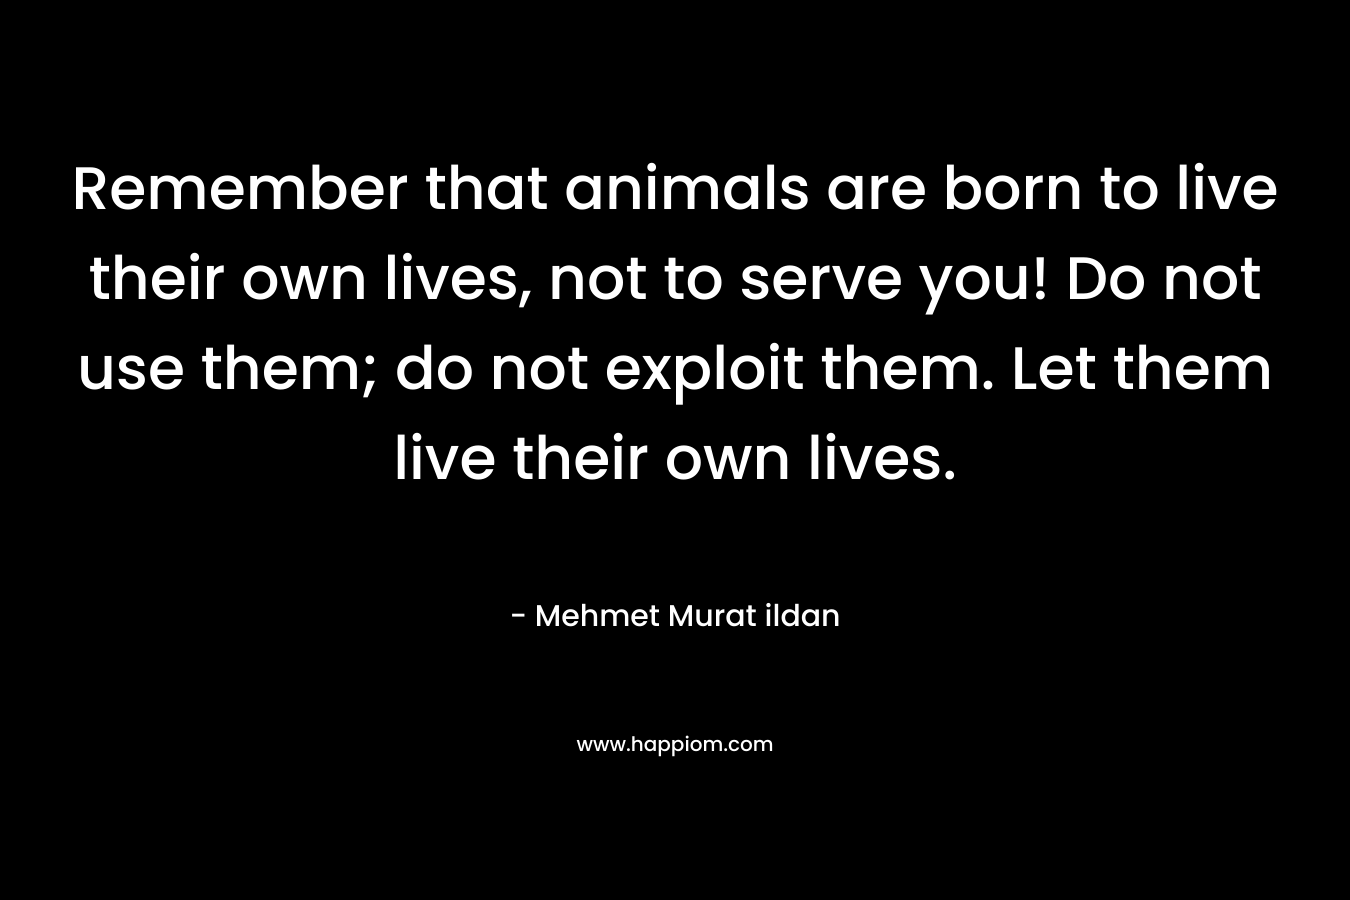 Remember that animals are born to live their own lives, not to serve you! Do not use them; do not exploit them. Let them live their own lives. – Mehmet Murat ildan